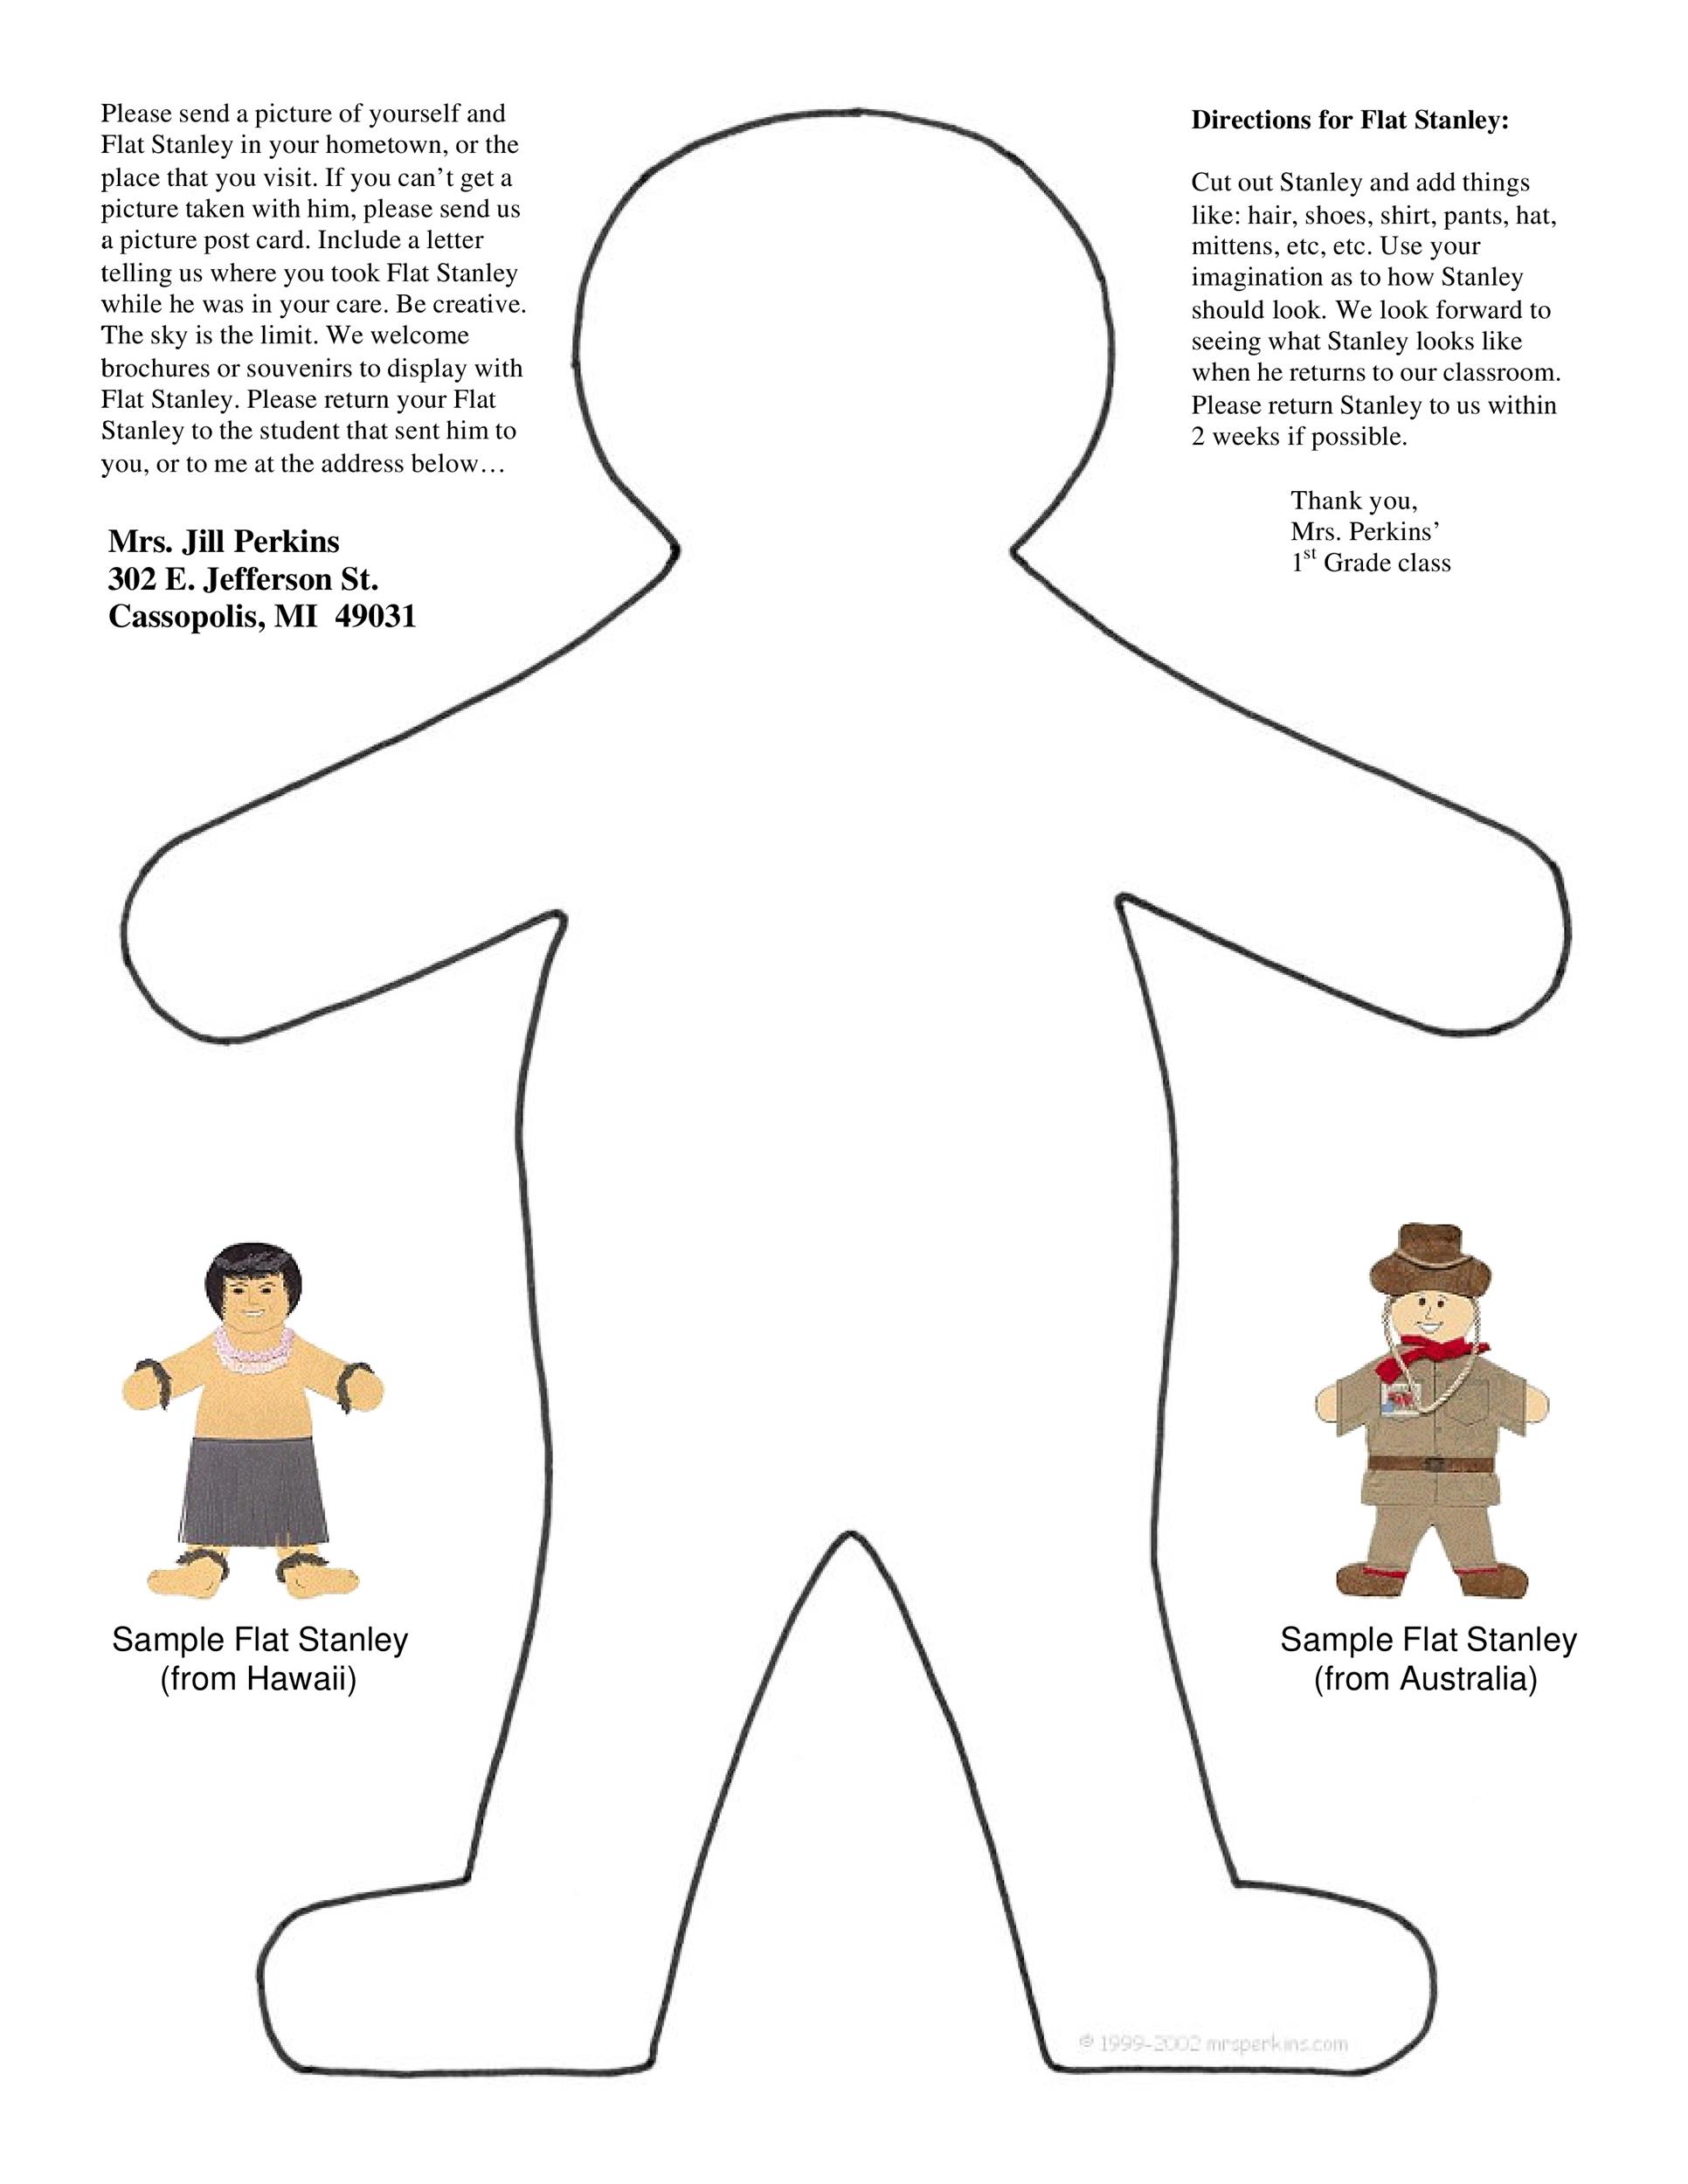 37 Flat Stanley Templates & Letter Examples ᐅ TemplateLab